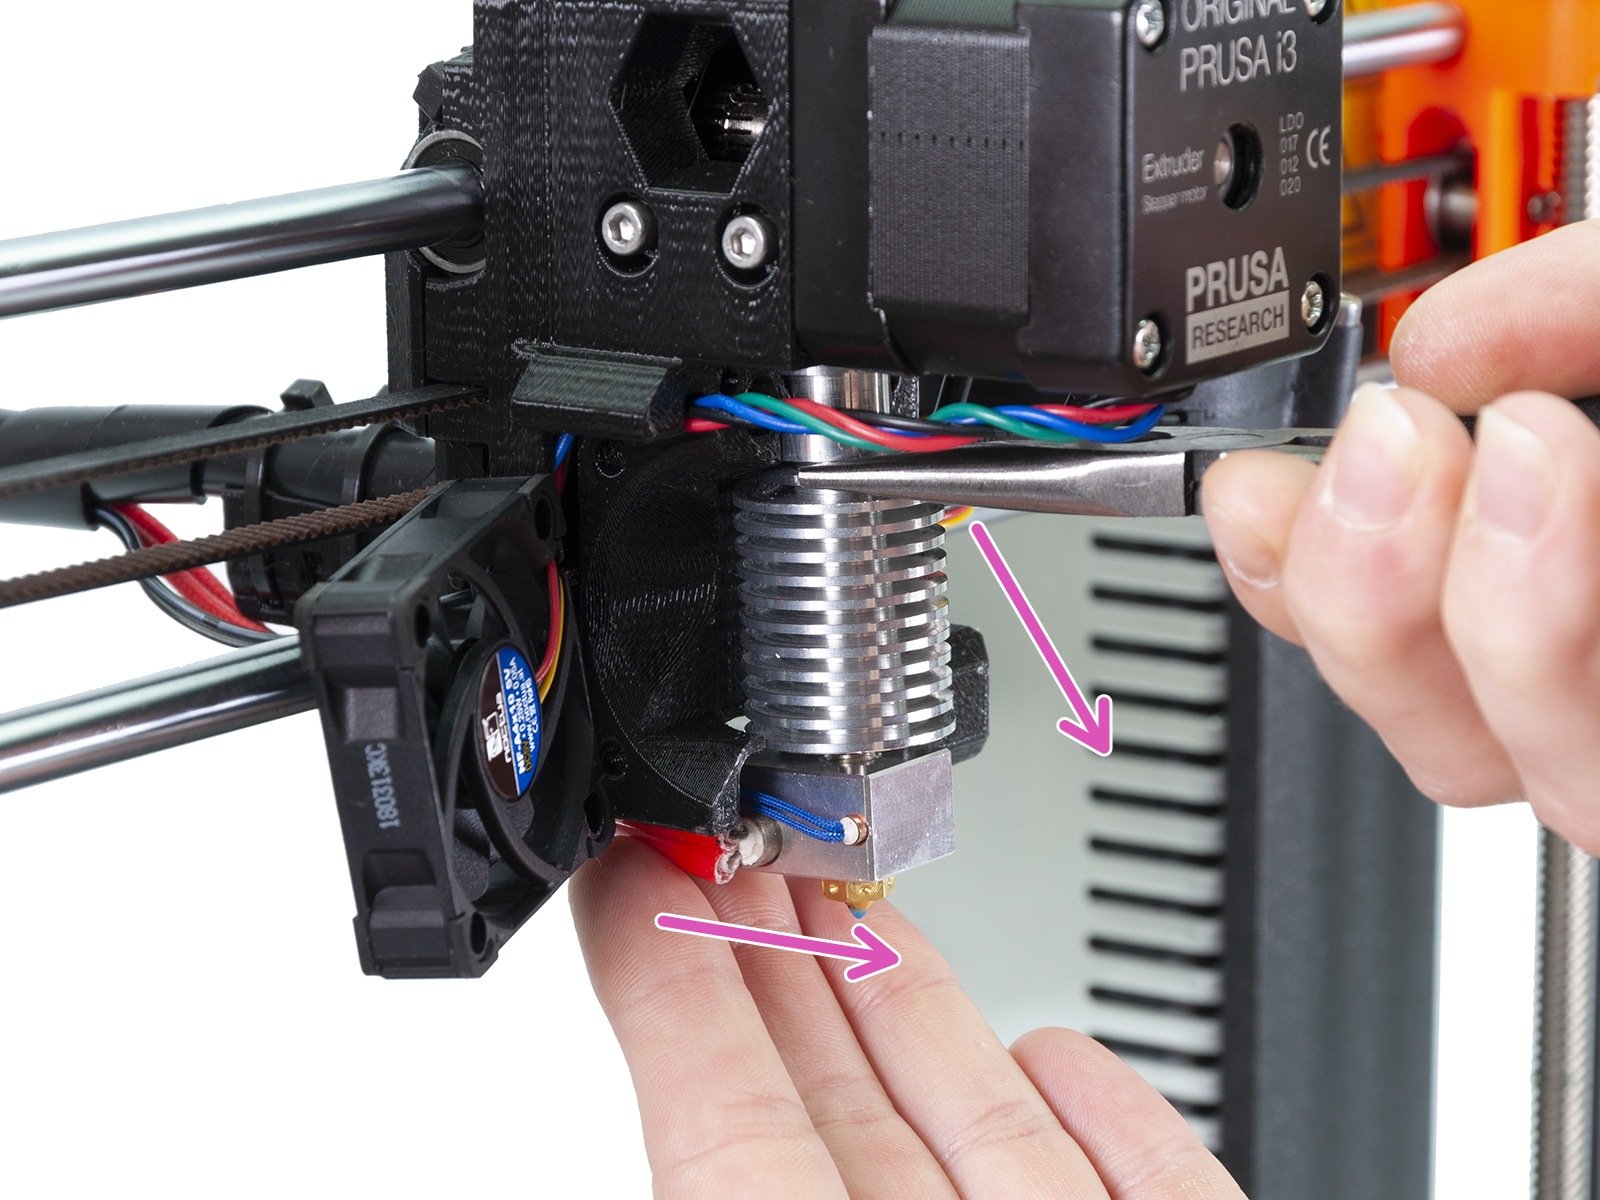 Partial disassembly of the extruder